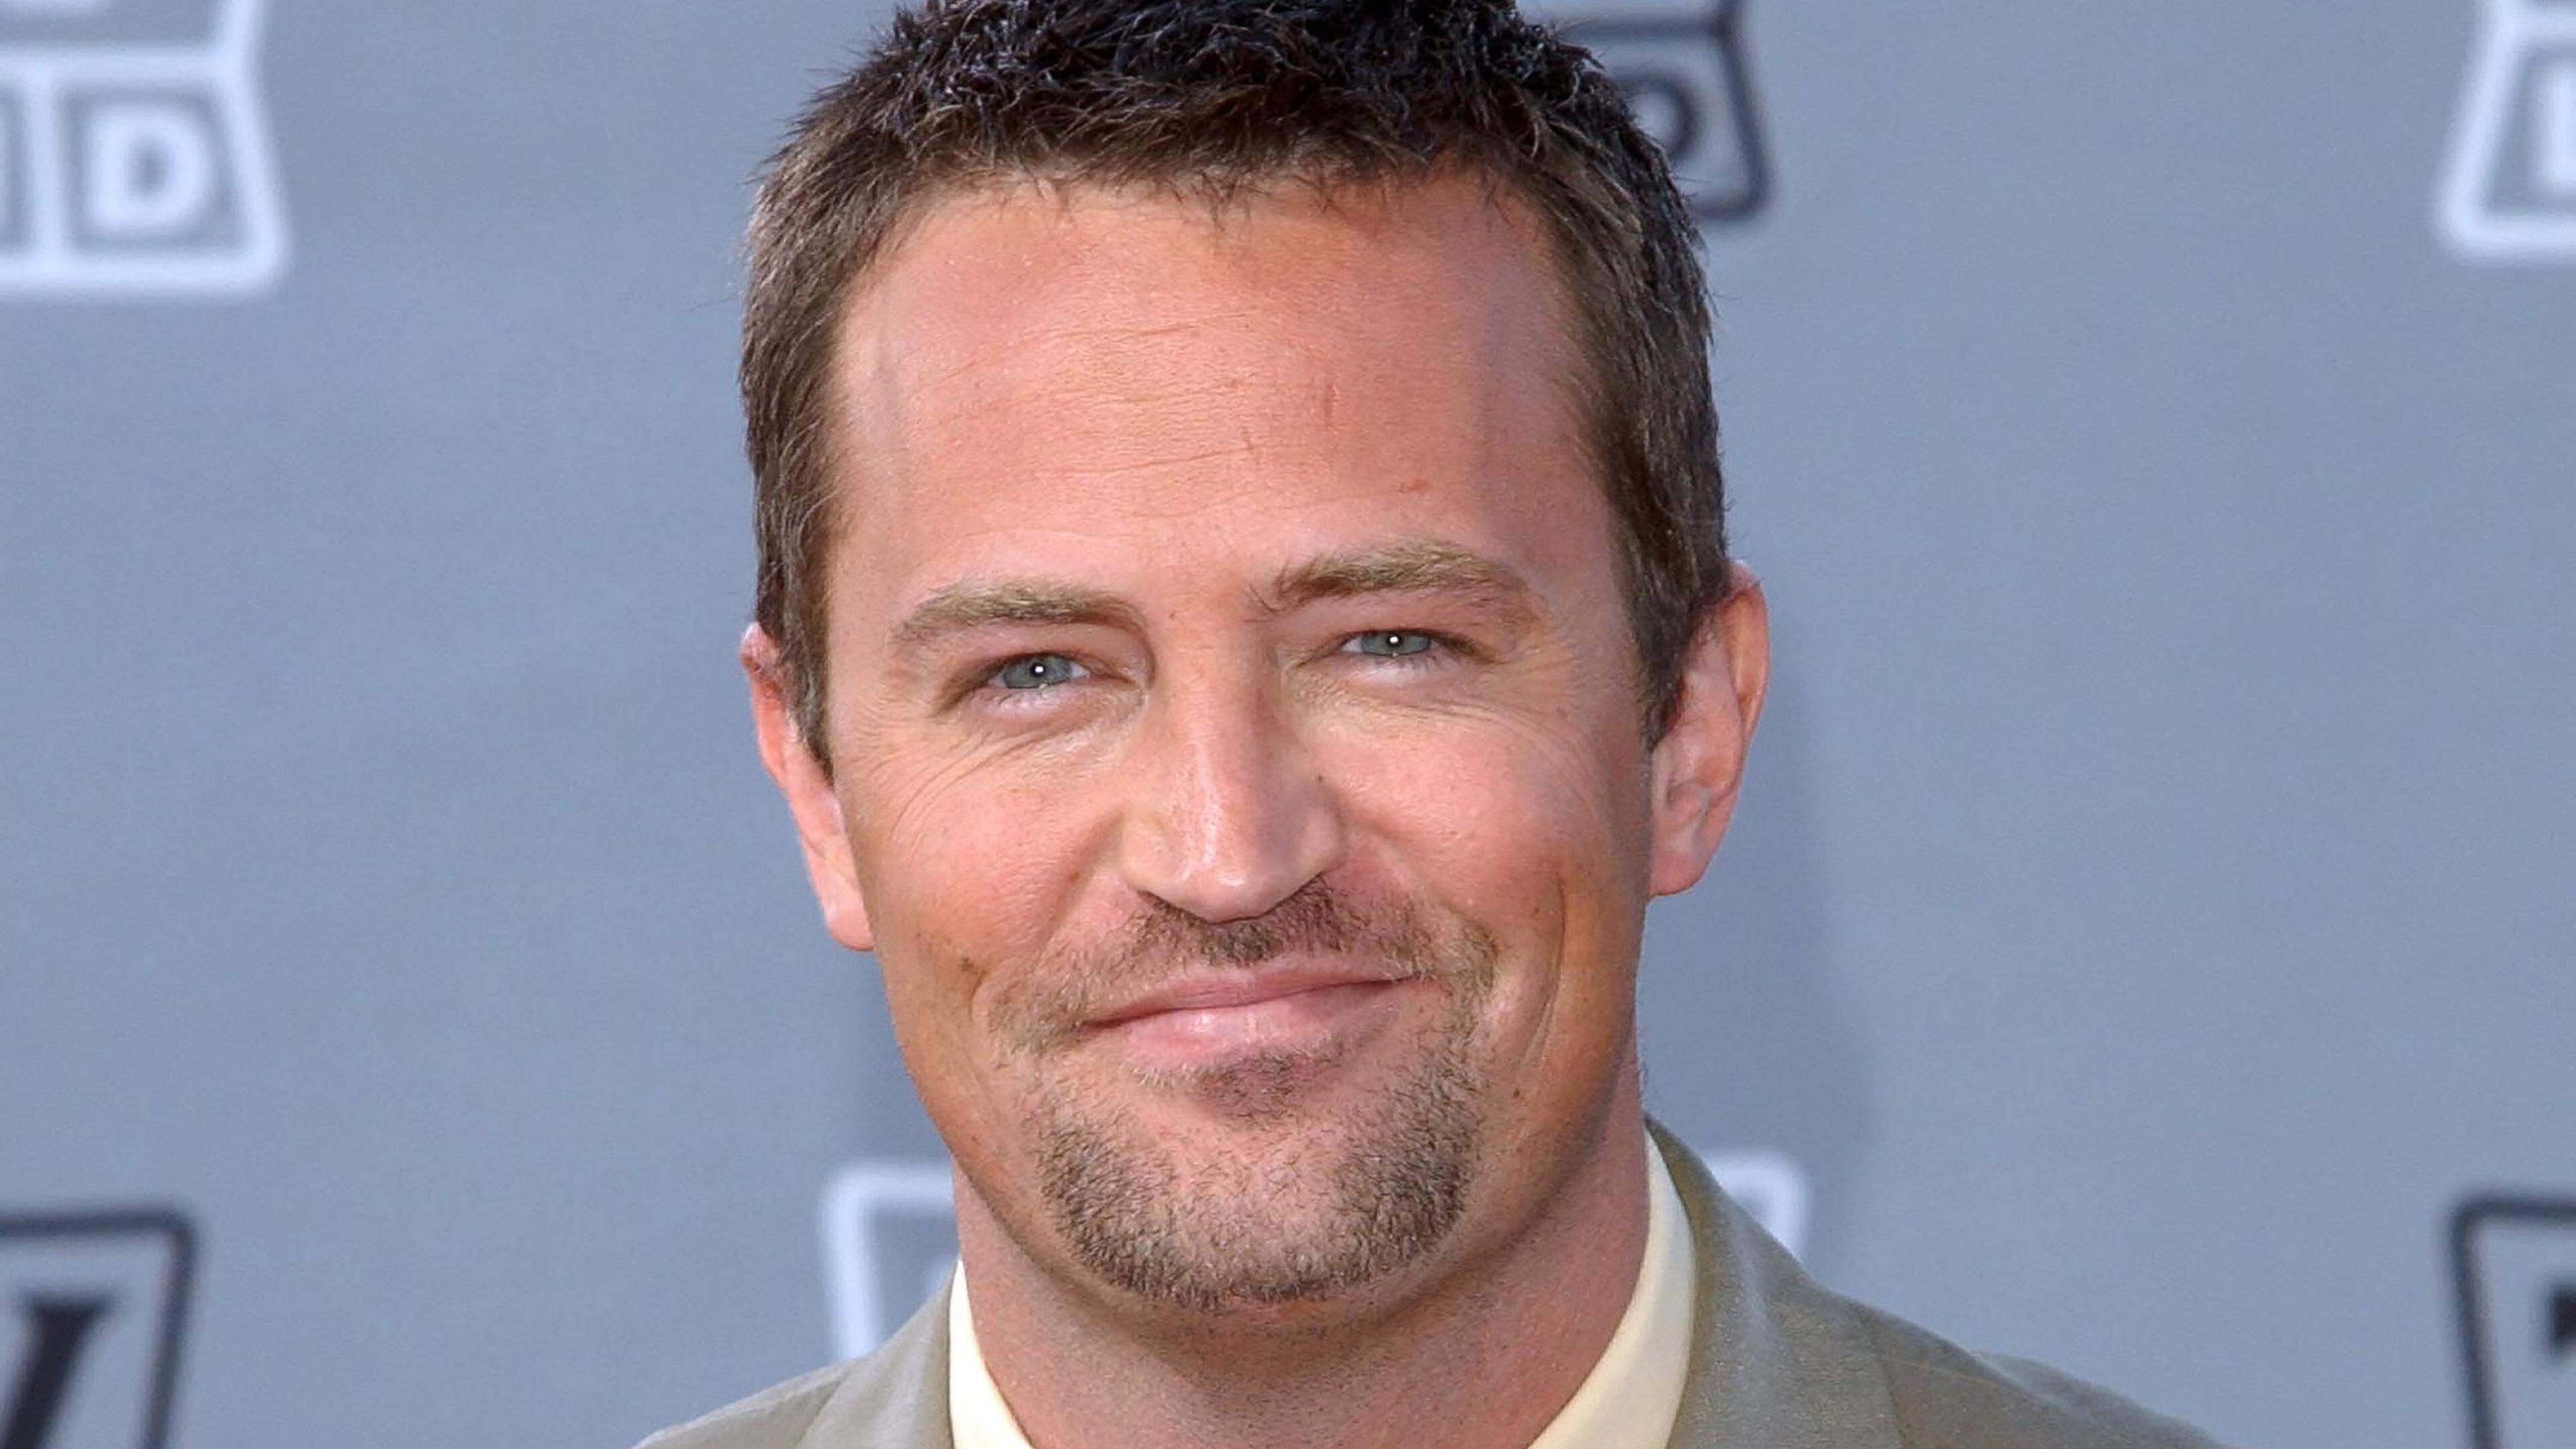 (FILES) Actor Matthew Perry attends the 2003 TV Land awards at the Palladium theatre in Hollywood on March 2, 2003. Matthew Perry, one of the stars of smash hit TV sitcom "Friends," has been found dead at his home, US media reported Saturday October 28. He was 54.
Law enforcement sources told the Los Angeles Times that Perry was found unresponsive in a hot tub at his Los Angeles home.
The LA Times and TMZ, which first reported the news, both said there were no signs of foul play, citing anonymous sources. (Photo by Chris Delmas / AFP)